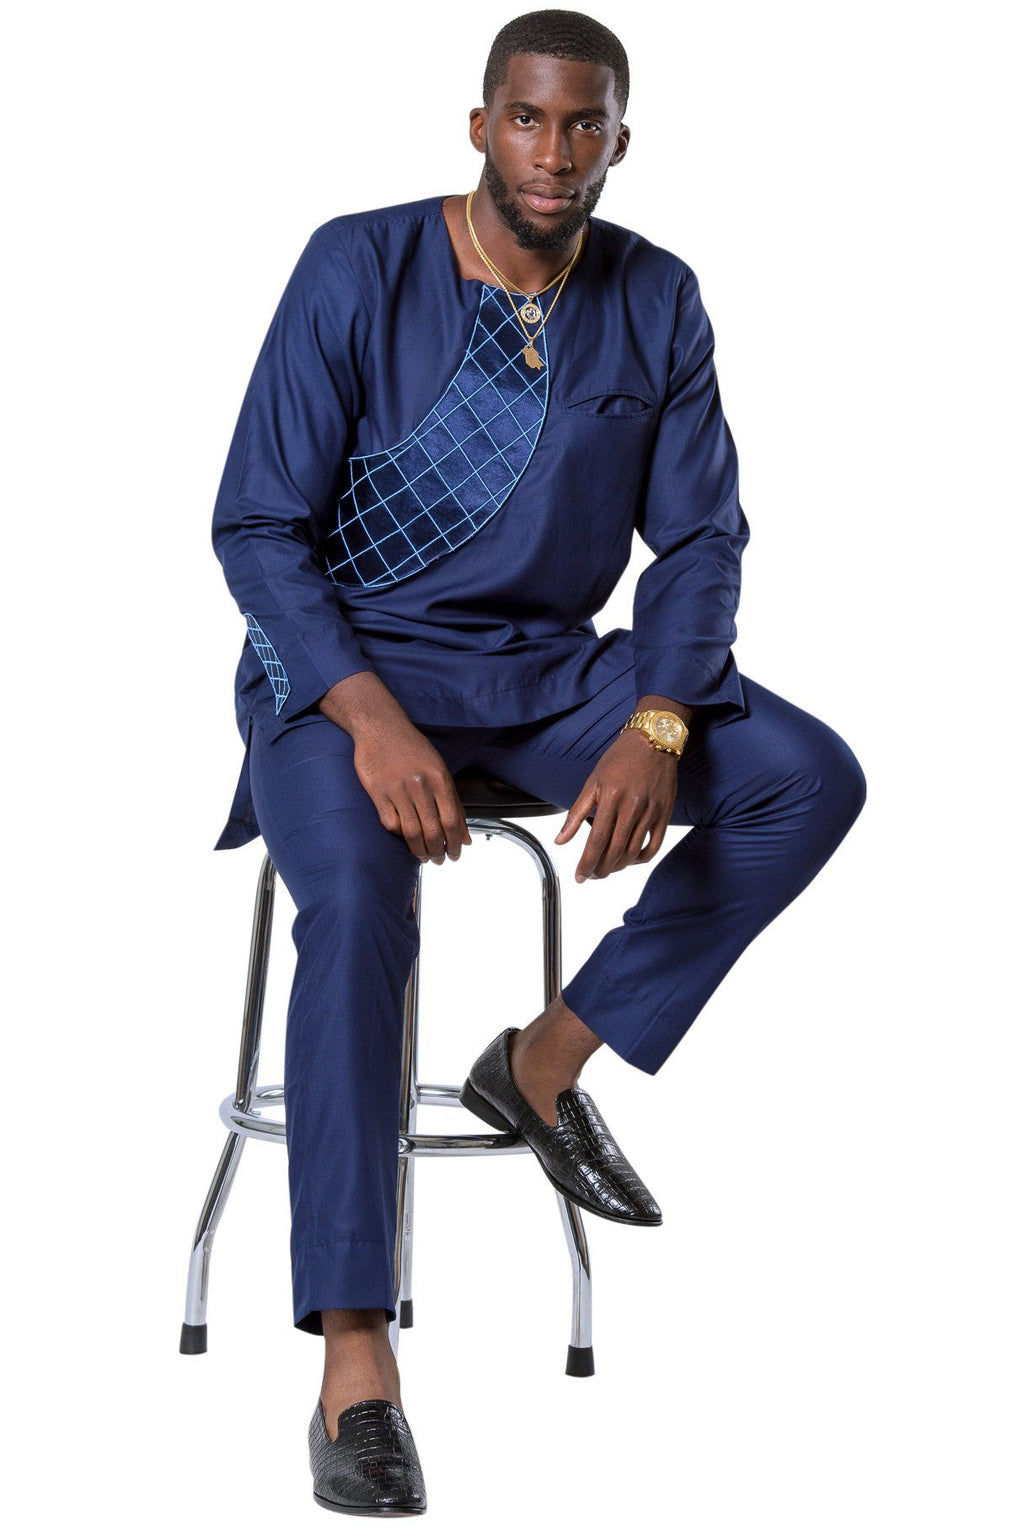 Baba Embroidered 2-pieces African Men's Wear ( Shirt + Pant) - Navy ...